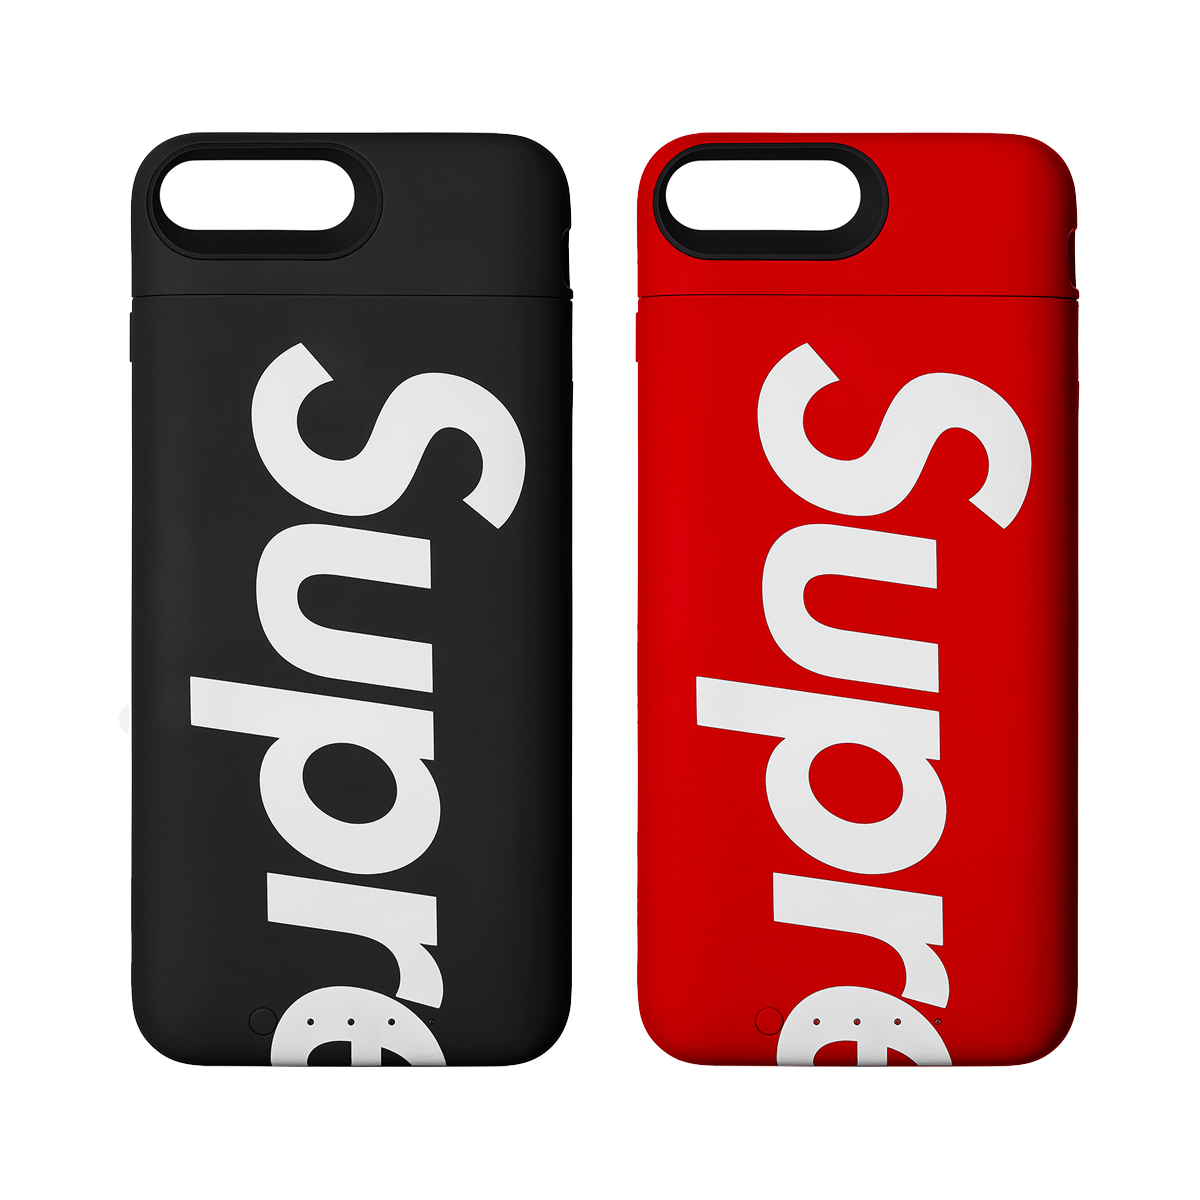 Supreme®/mophie® iPhone 8 Plus RED